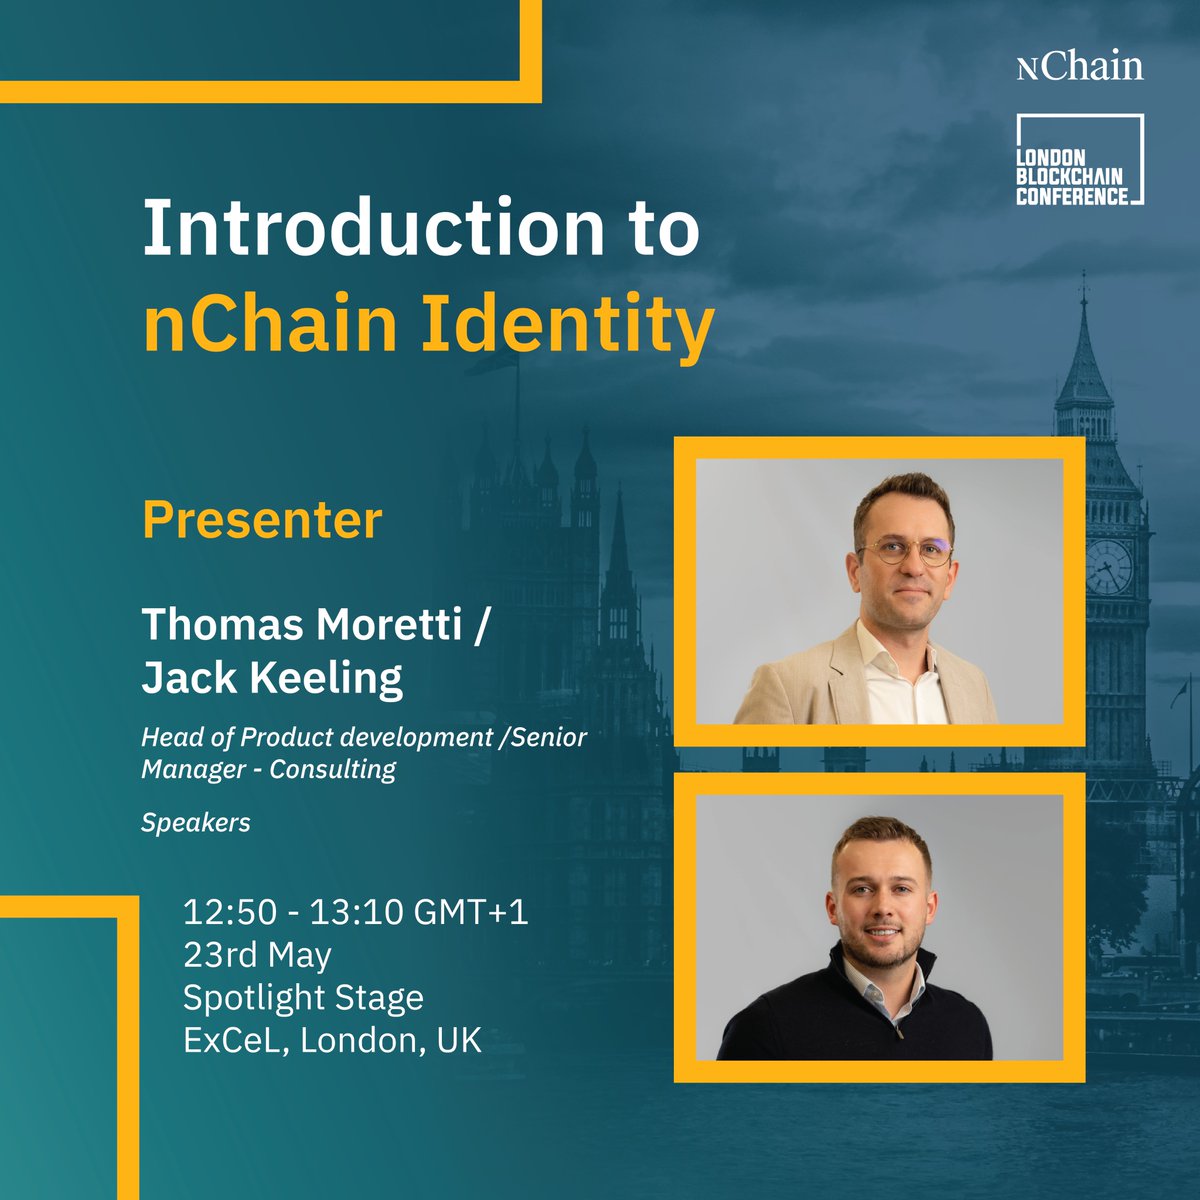 We are excited to share that Thomas Moretti, the Head of Product Development, and Jack Keeling, Senior Manager – Consulting, will be presenting nChain’s new product, nChain Identity, at the upcoming London Blockchain Conference @LDN_Blockchain. During the demo session, Thomas